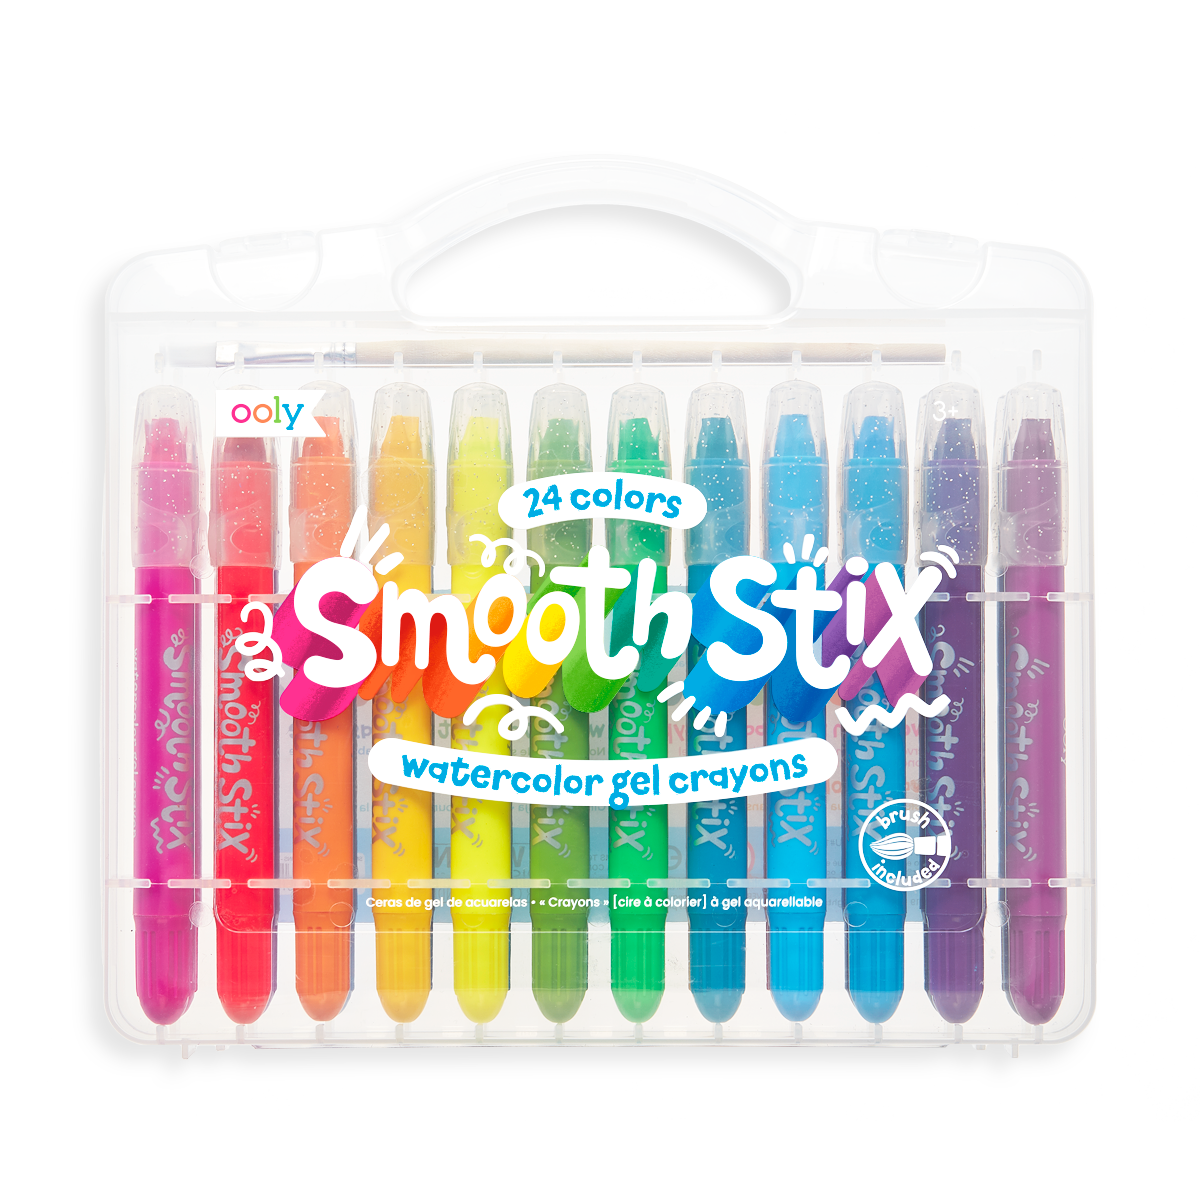 Smooth Stix Watercolor Gel Crayons - Set of 24 in package (front)